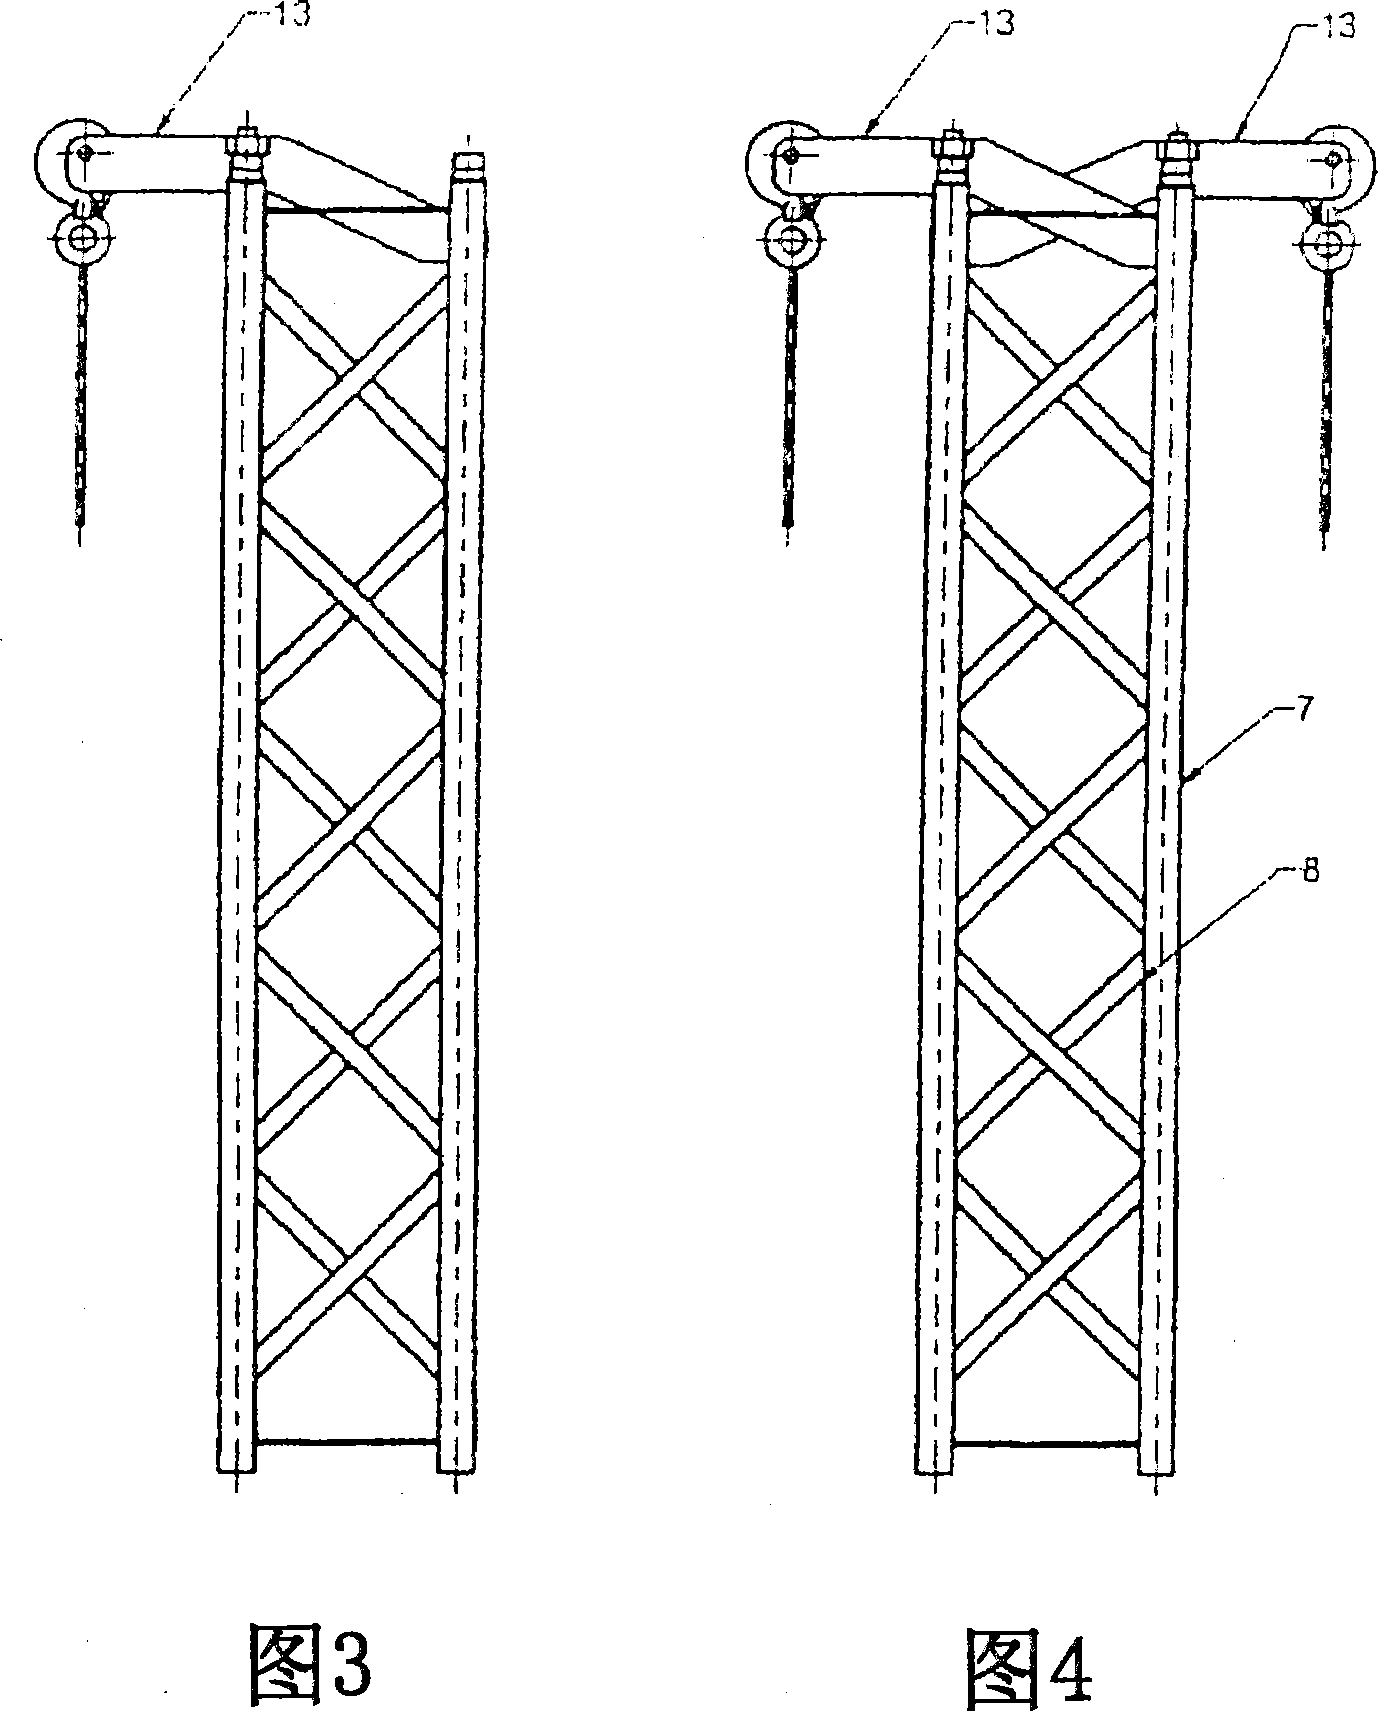 Platform support device for lifting loads or persons the height of a structure